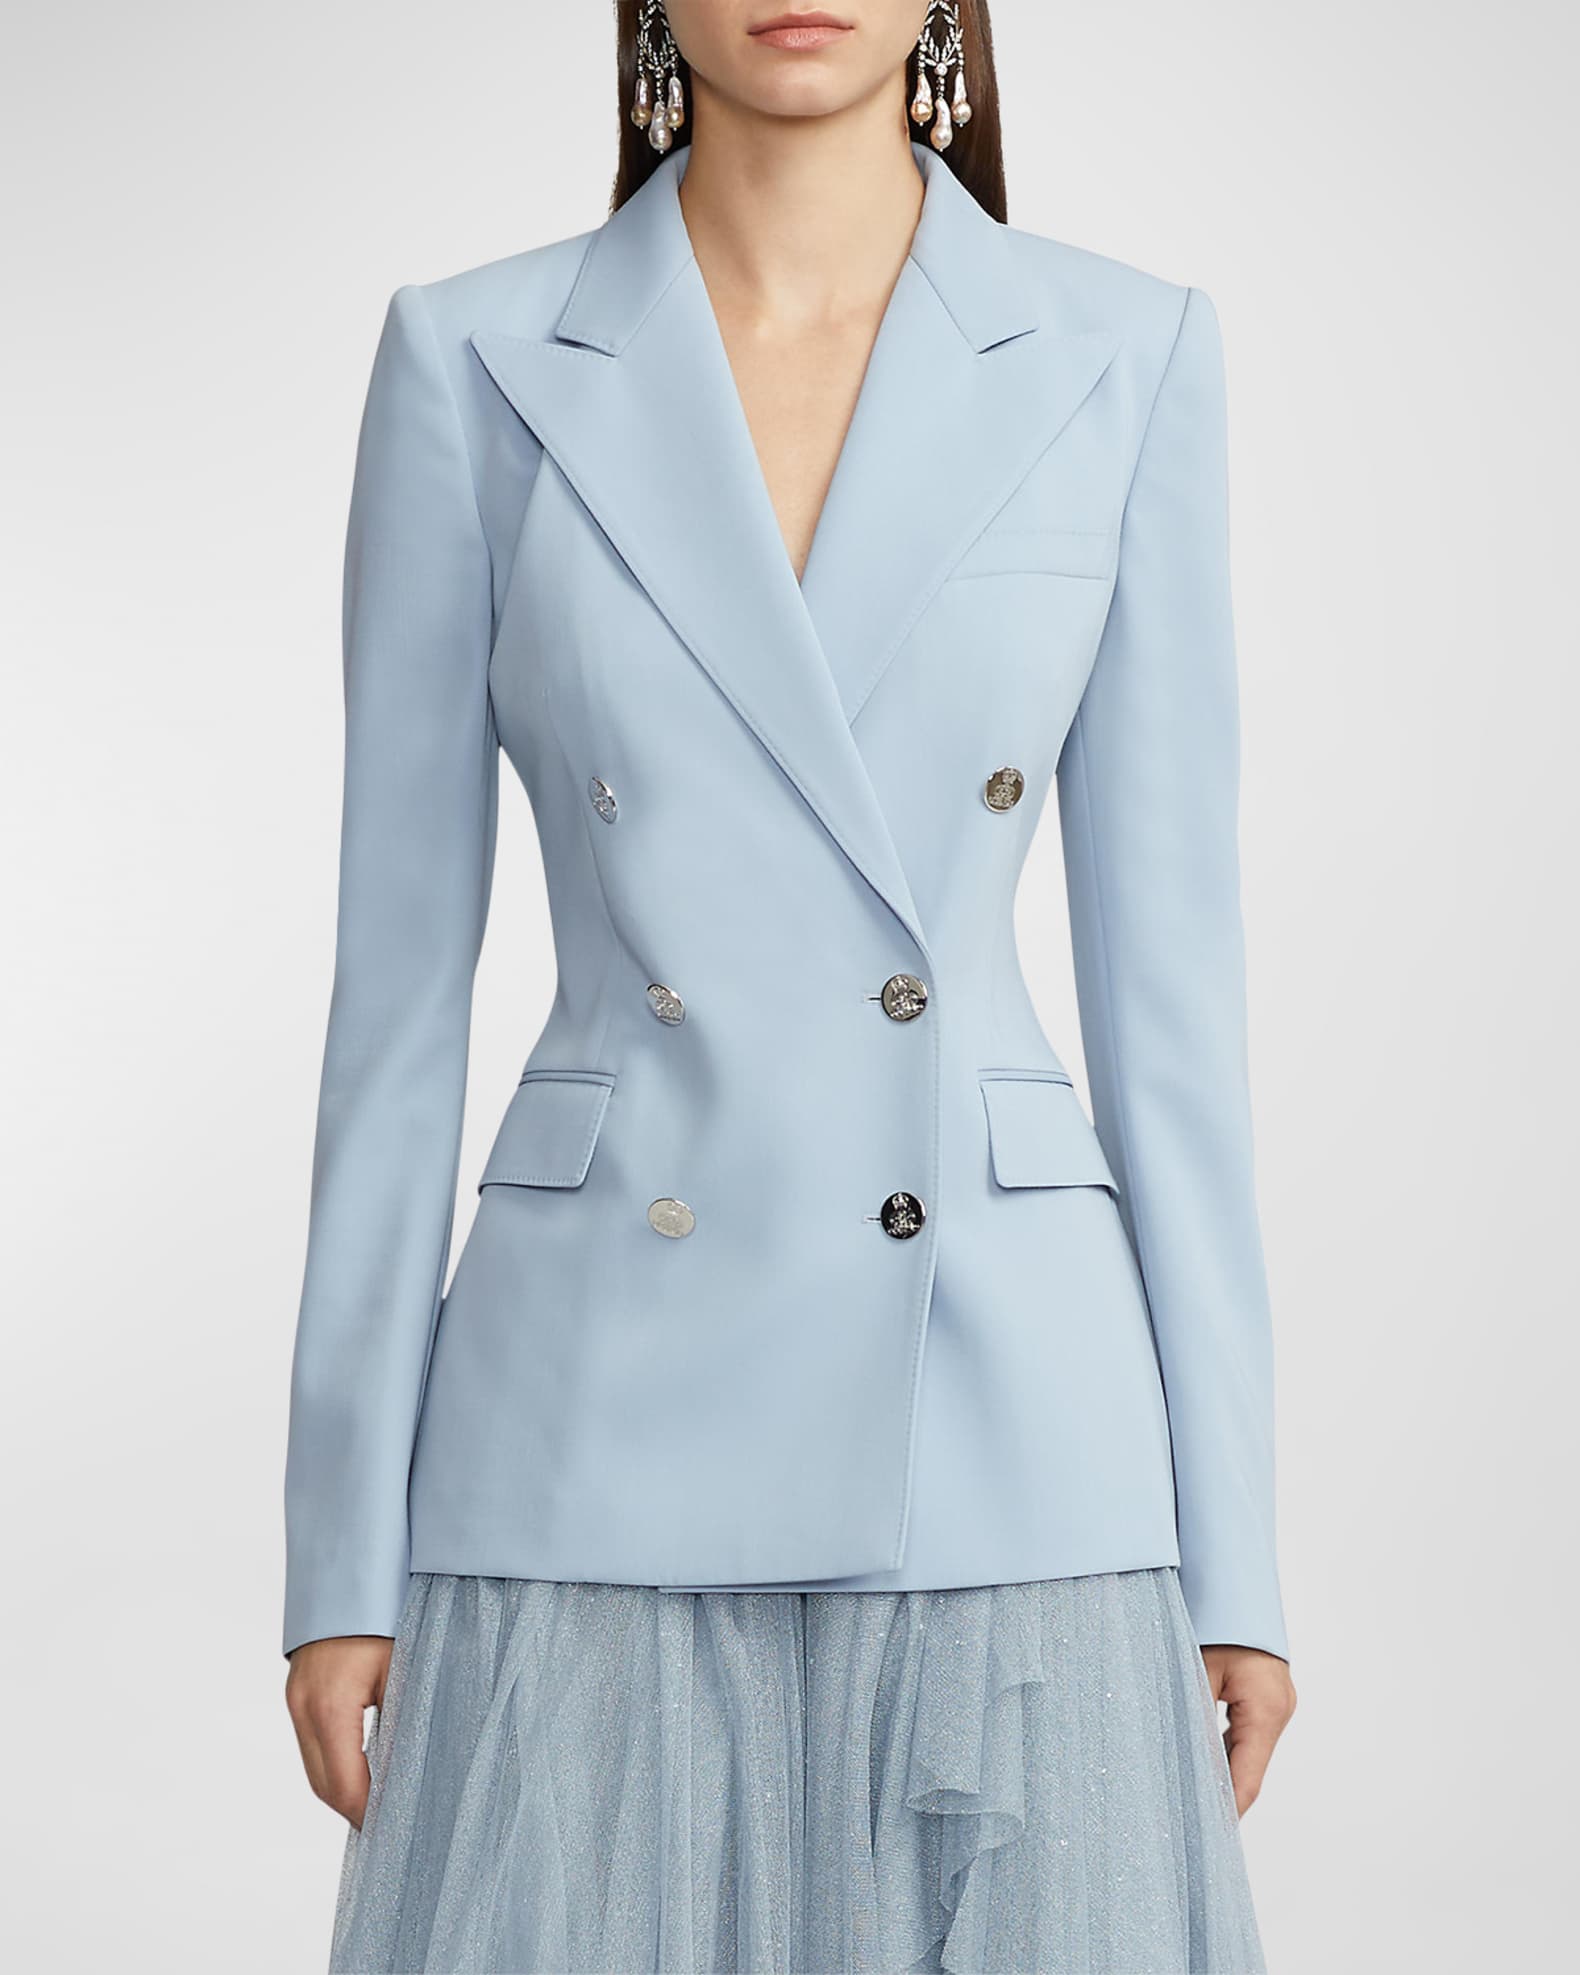 GUCCI - Cashmere Double Breasted Blazer Jacket